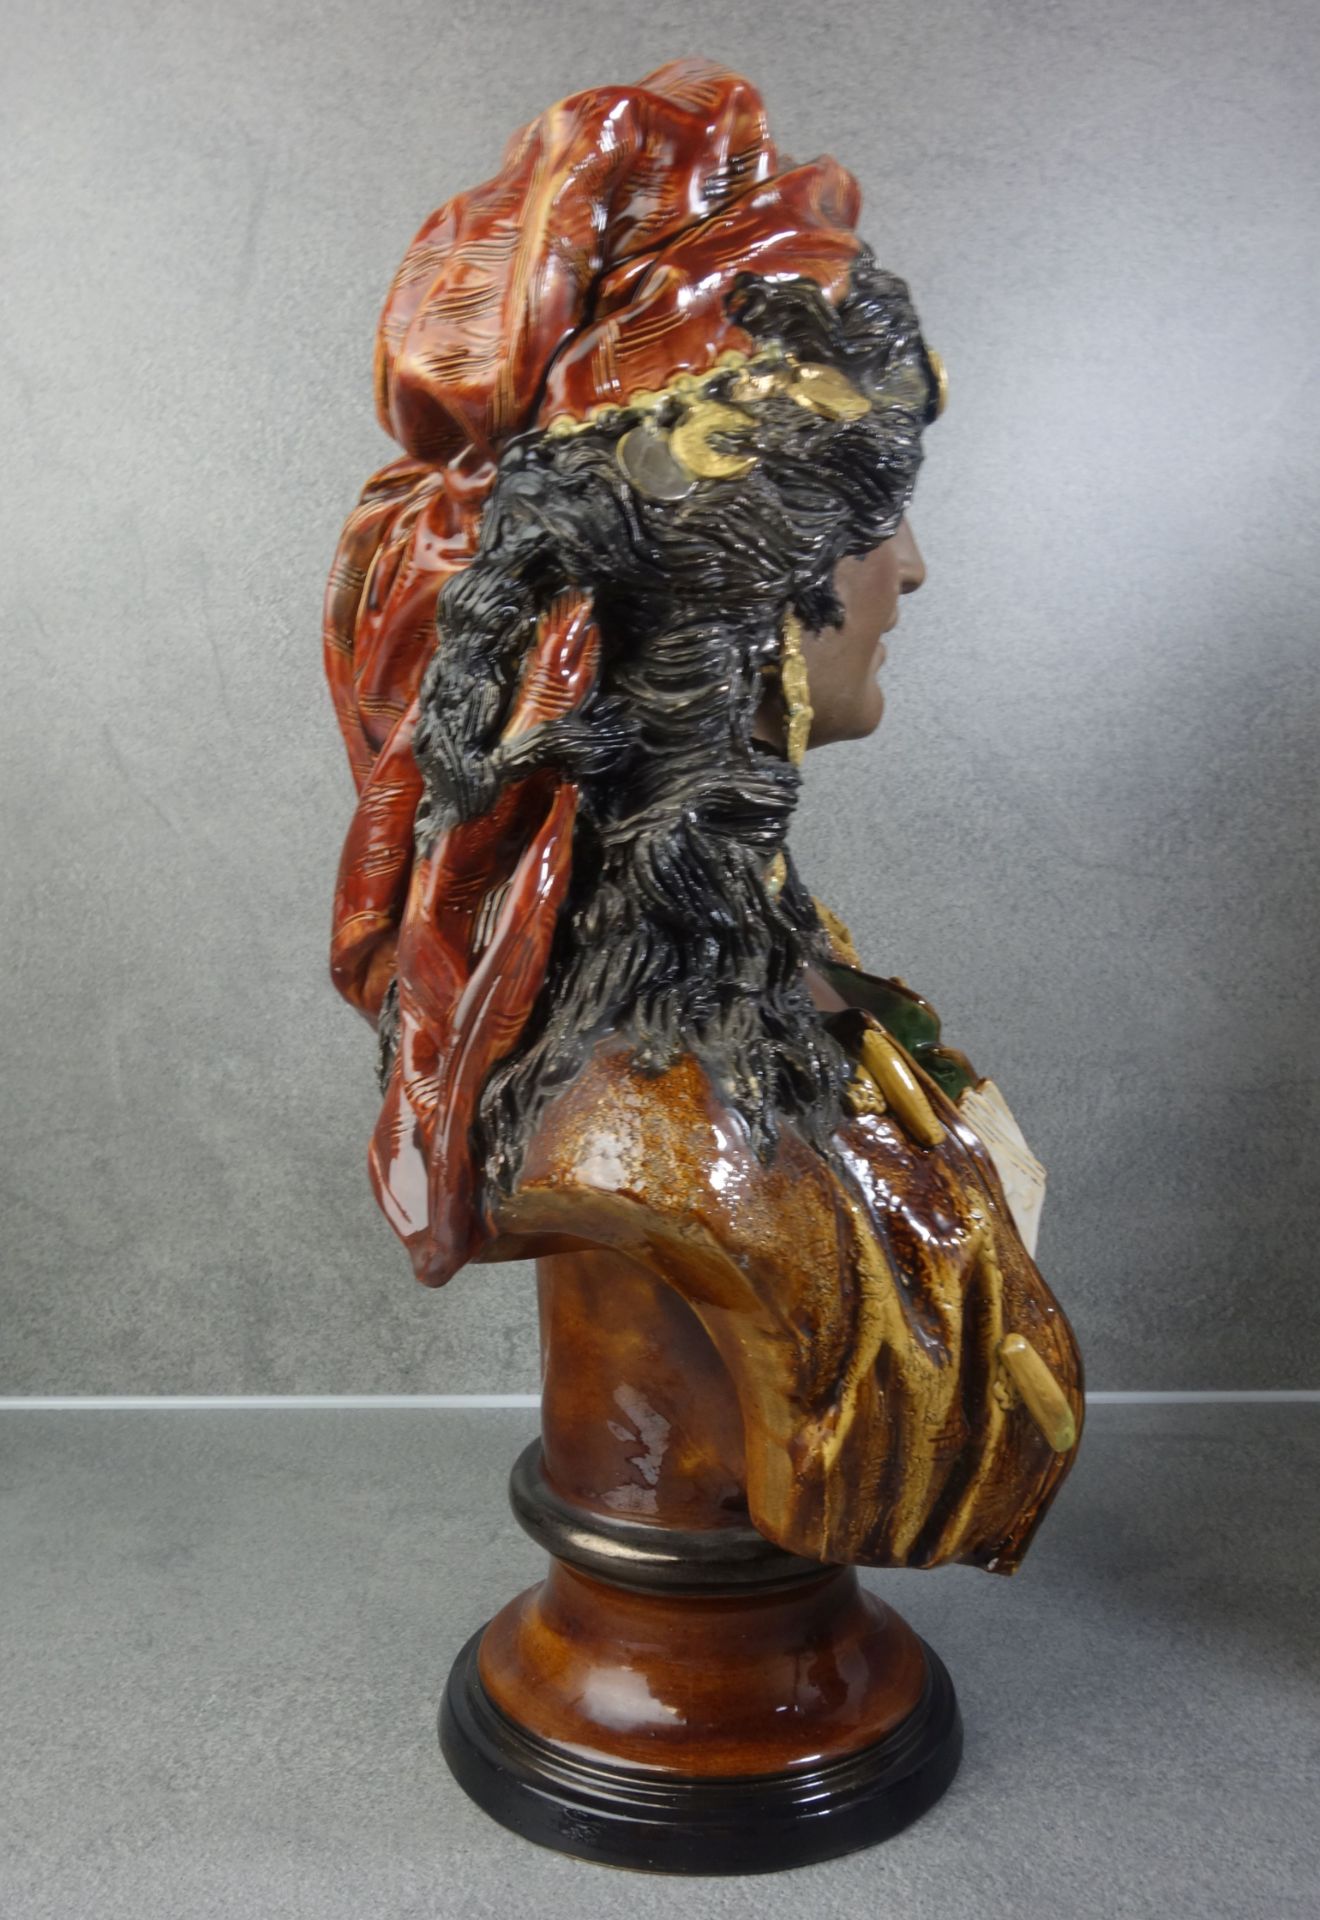 R. STURM SCULPTURES: "MUSICIAN" AND "FORTUNE TELLER" - Image 2 of 6